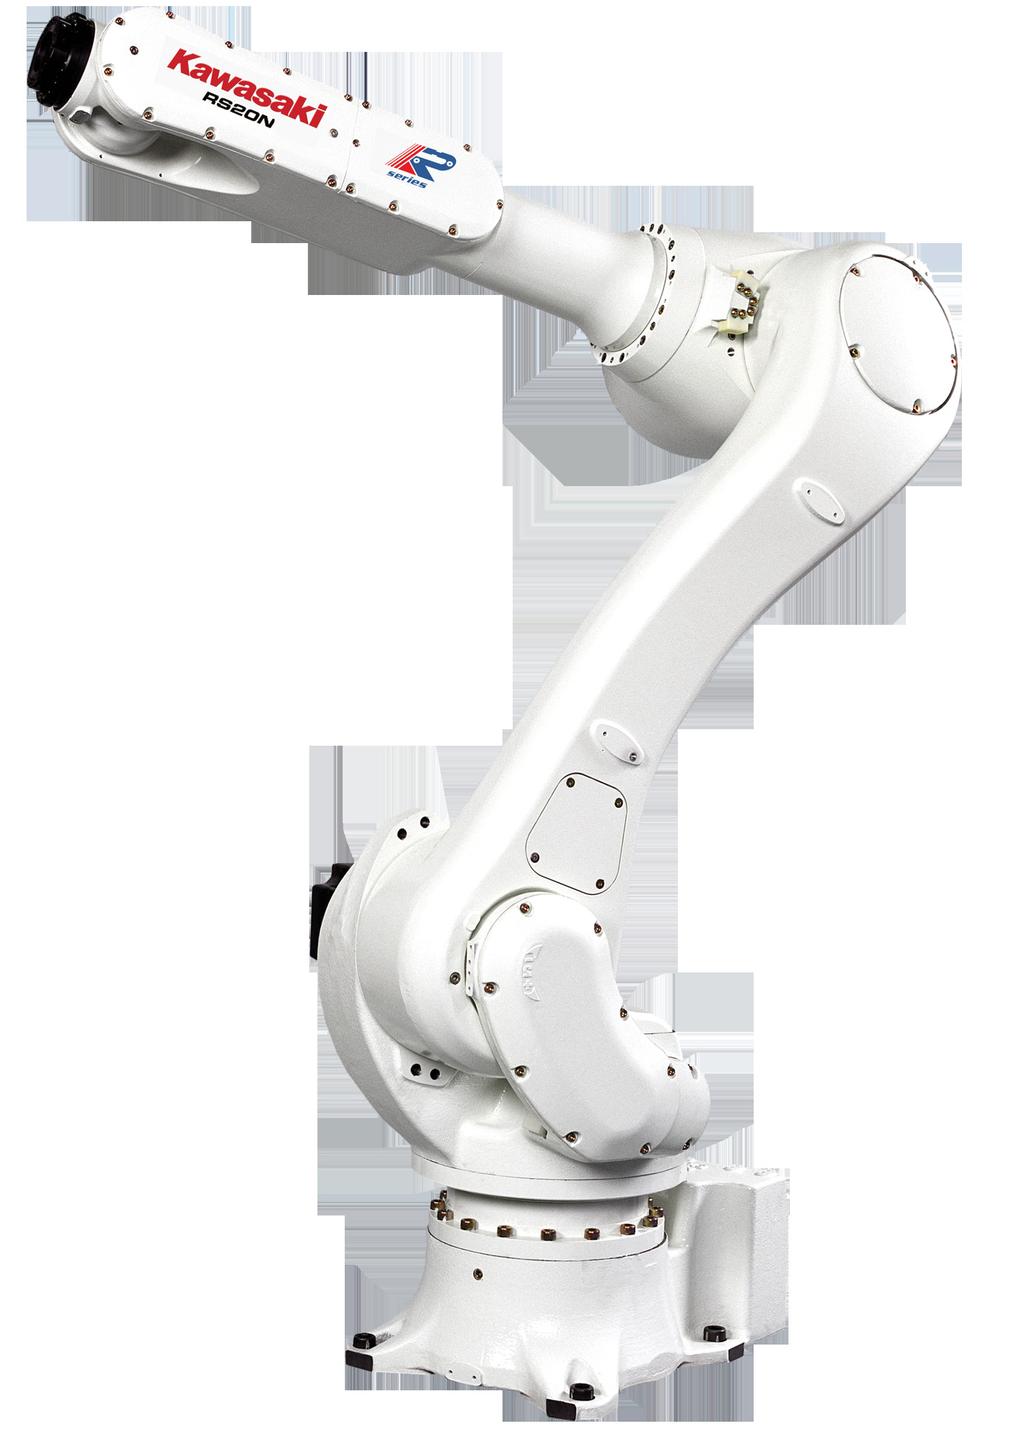 John Henry Foster Stäubli Robotics Innovative SCARA, 6-axis robots and software solutions Stäubli offers a complete range of 4-axis and 6-axis robots designed to handle up to 150 kg payload and run